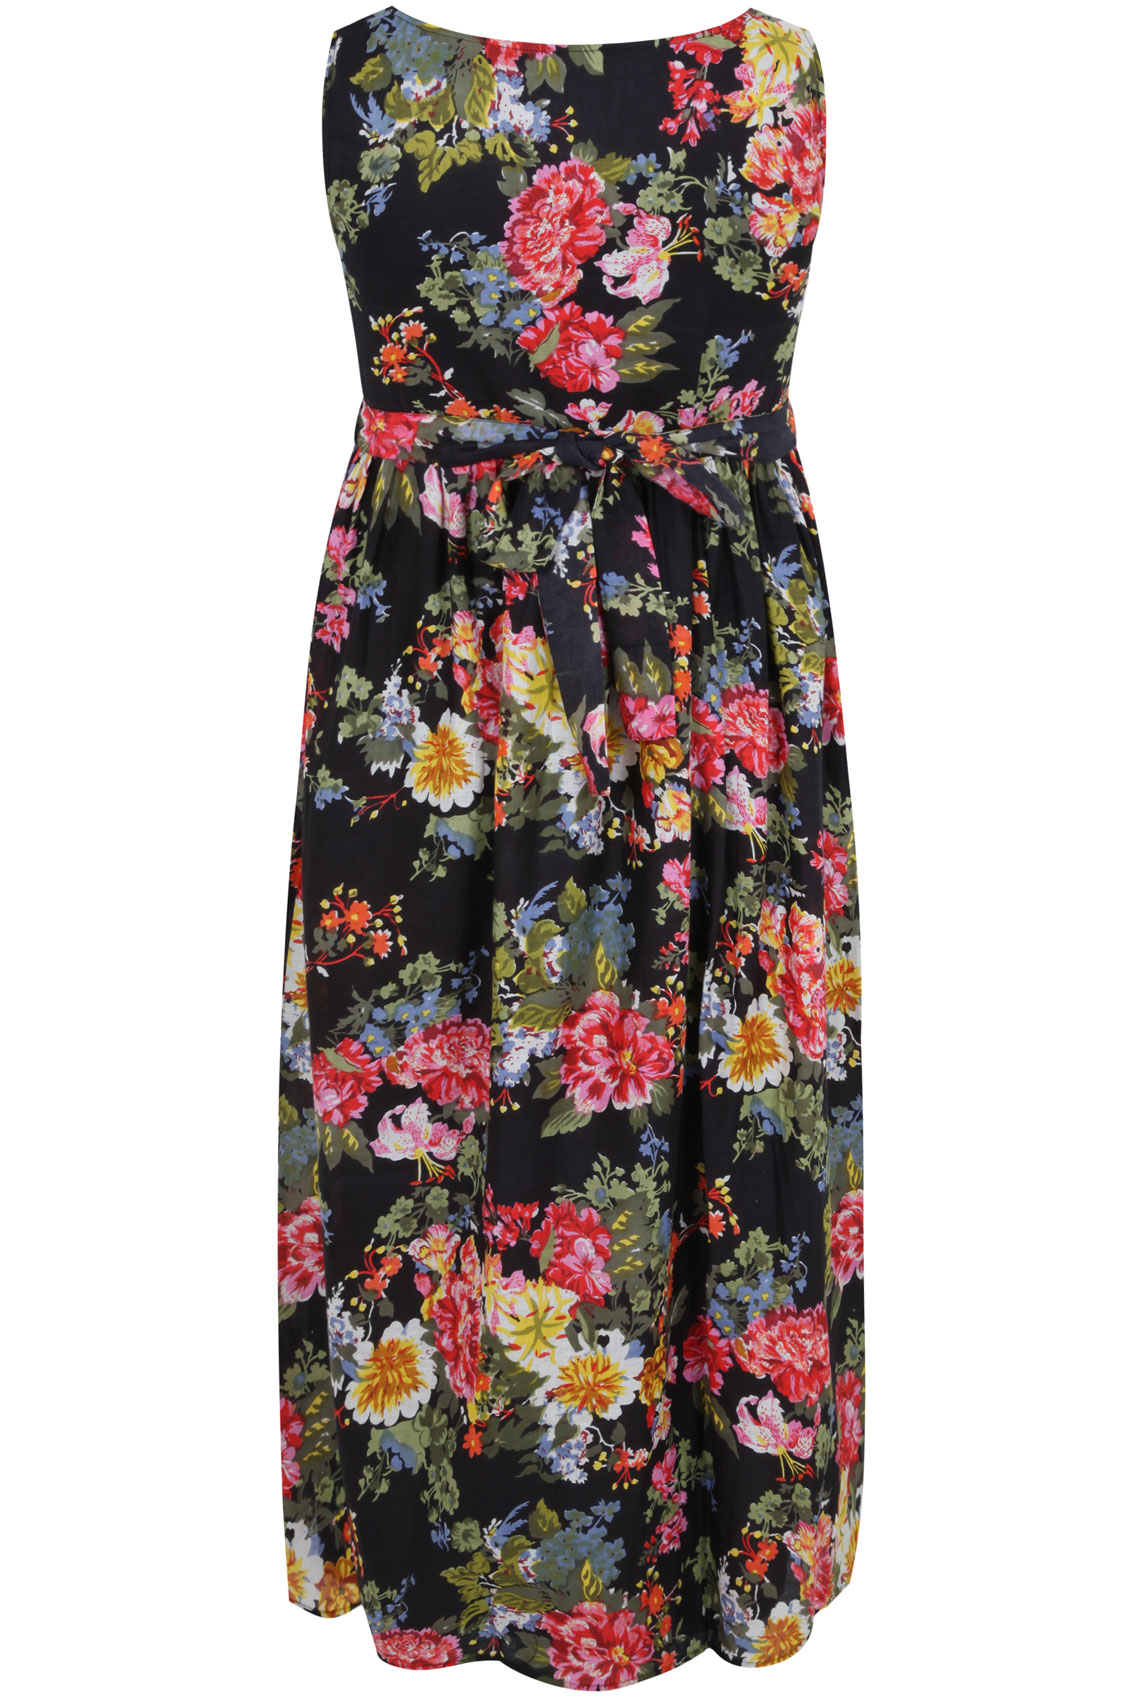 Floral Print Cotton Maxi Dress With Bead Embellishment plus Size 14 to 36